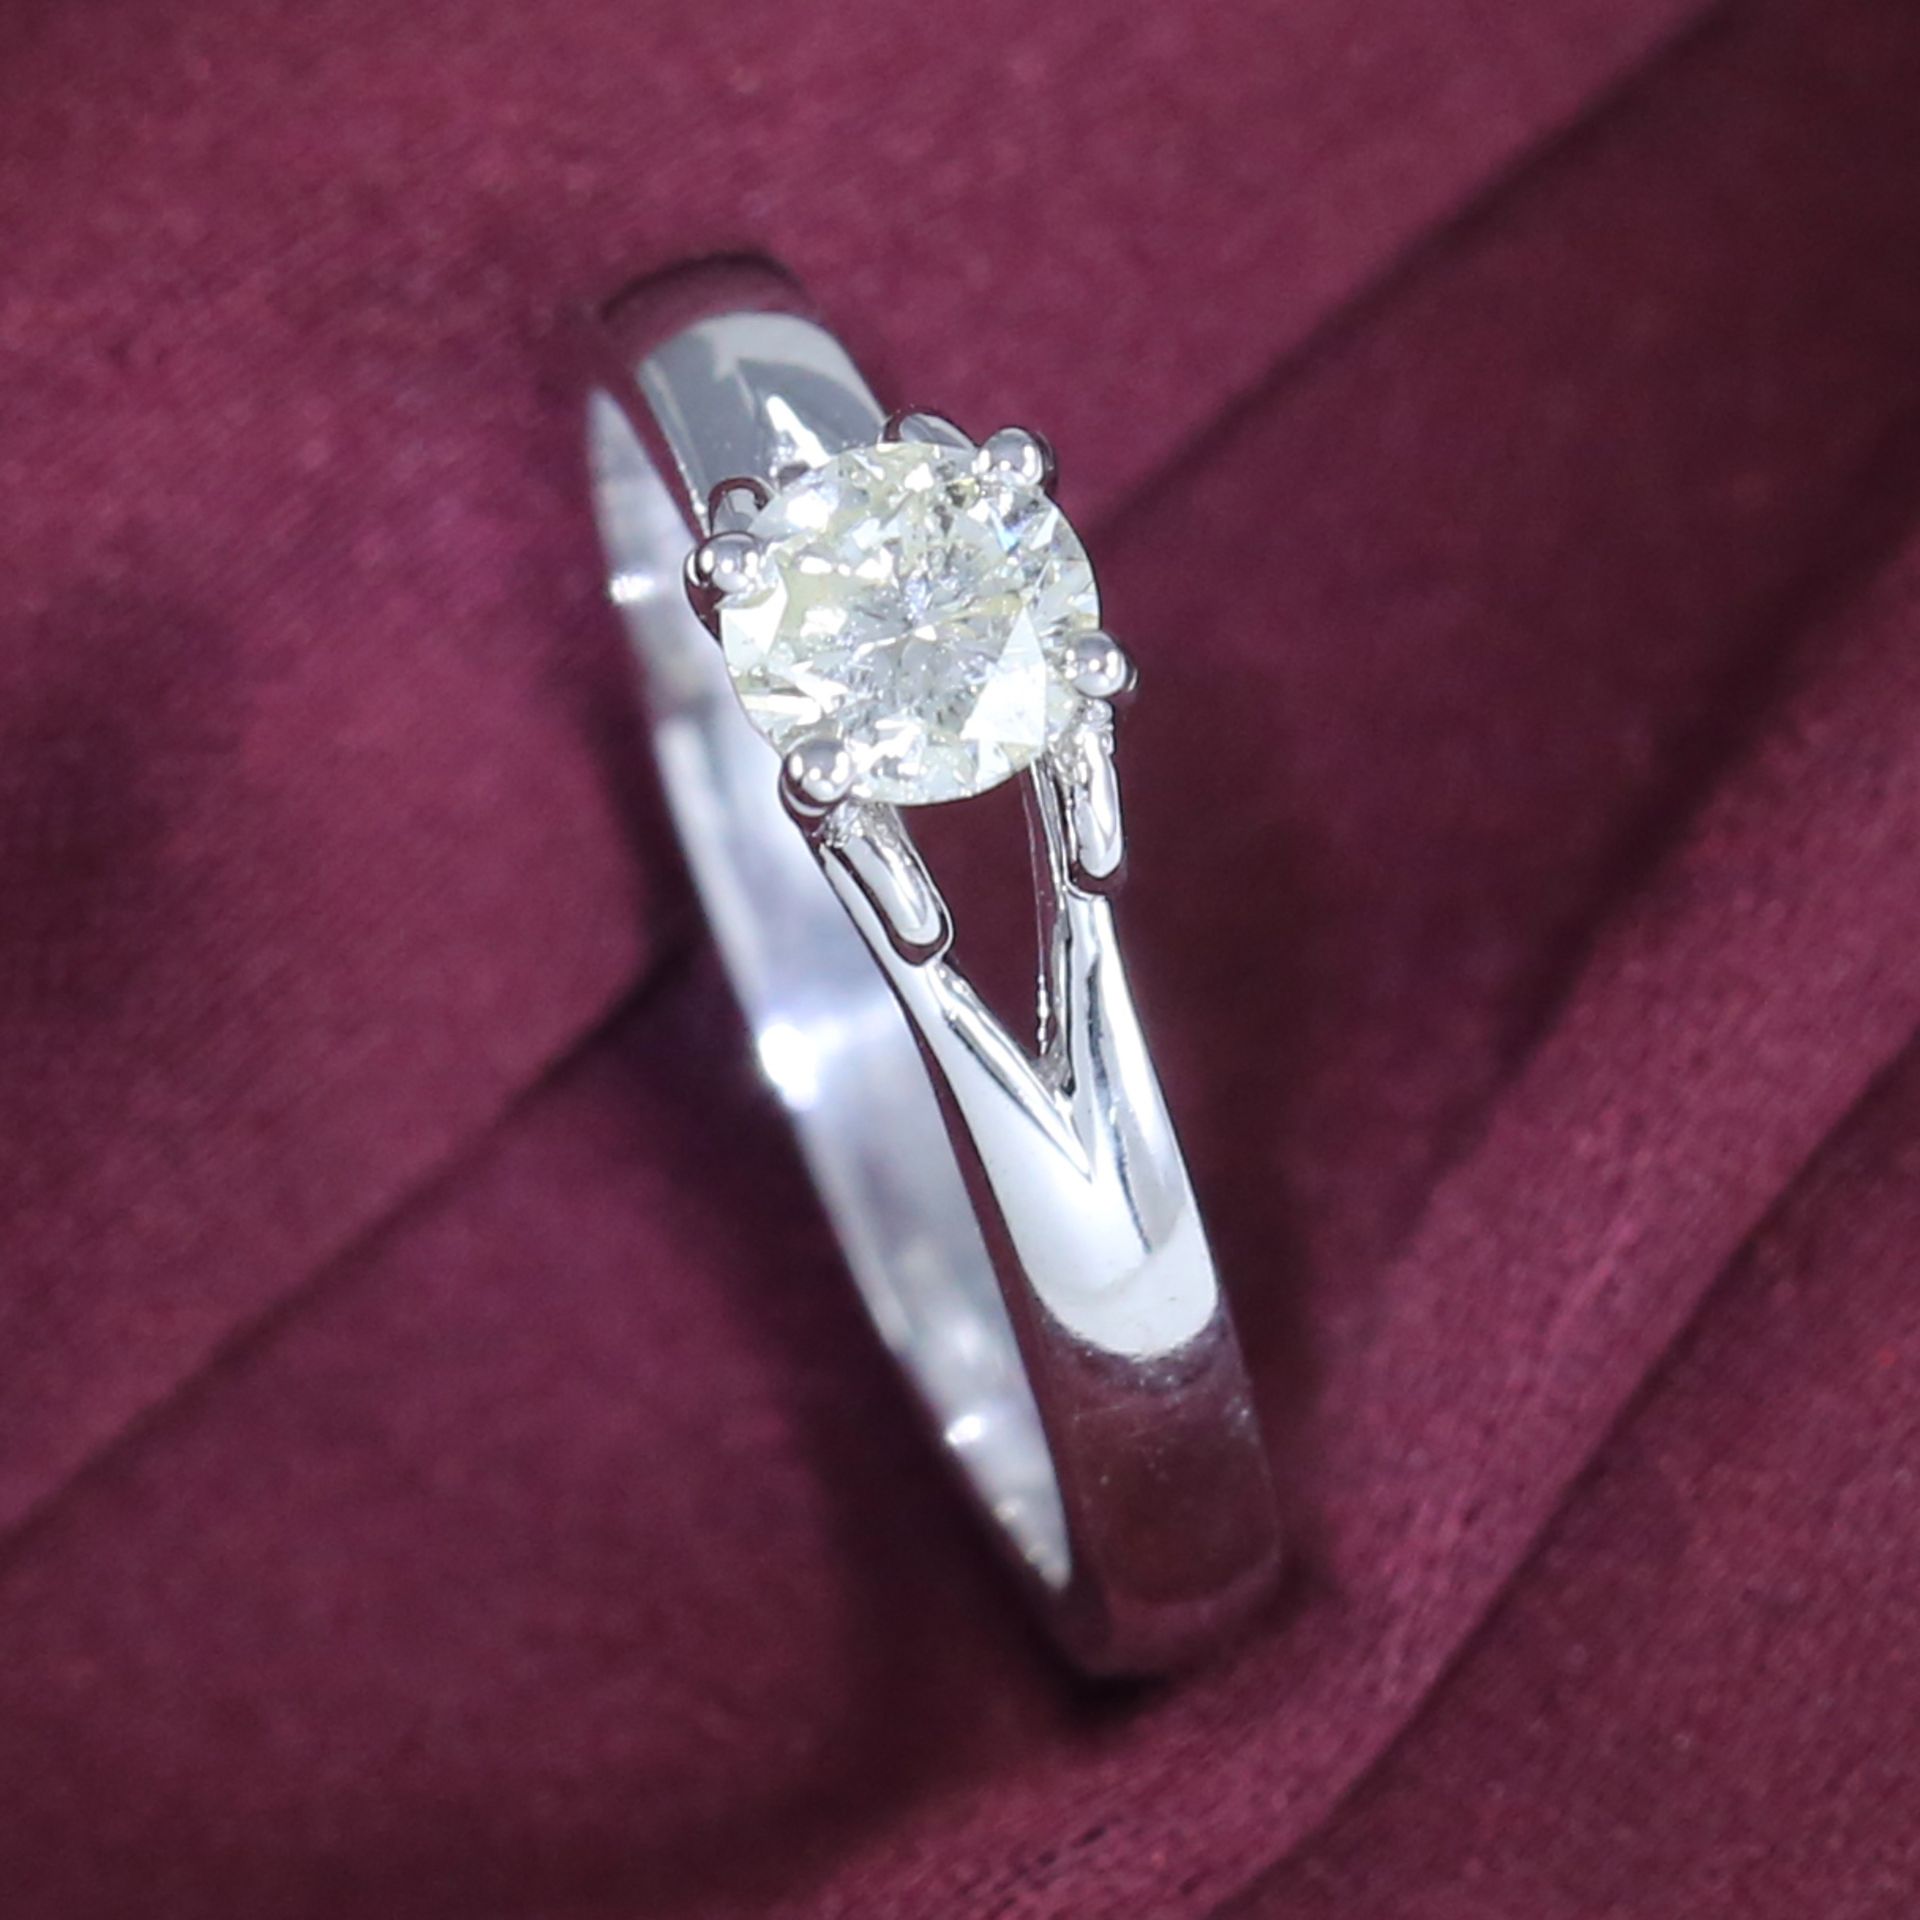 14 K White Gold Certified Solitaire Diamond Ring - Image 3 of 7